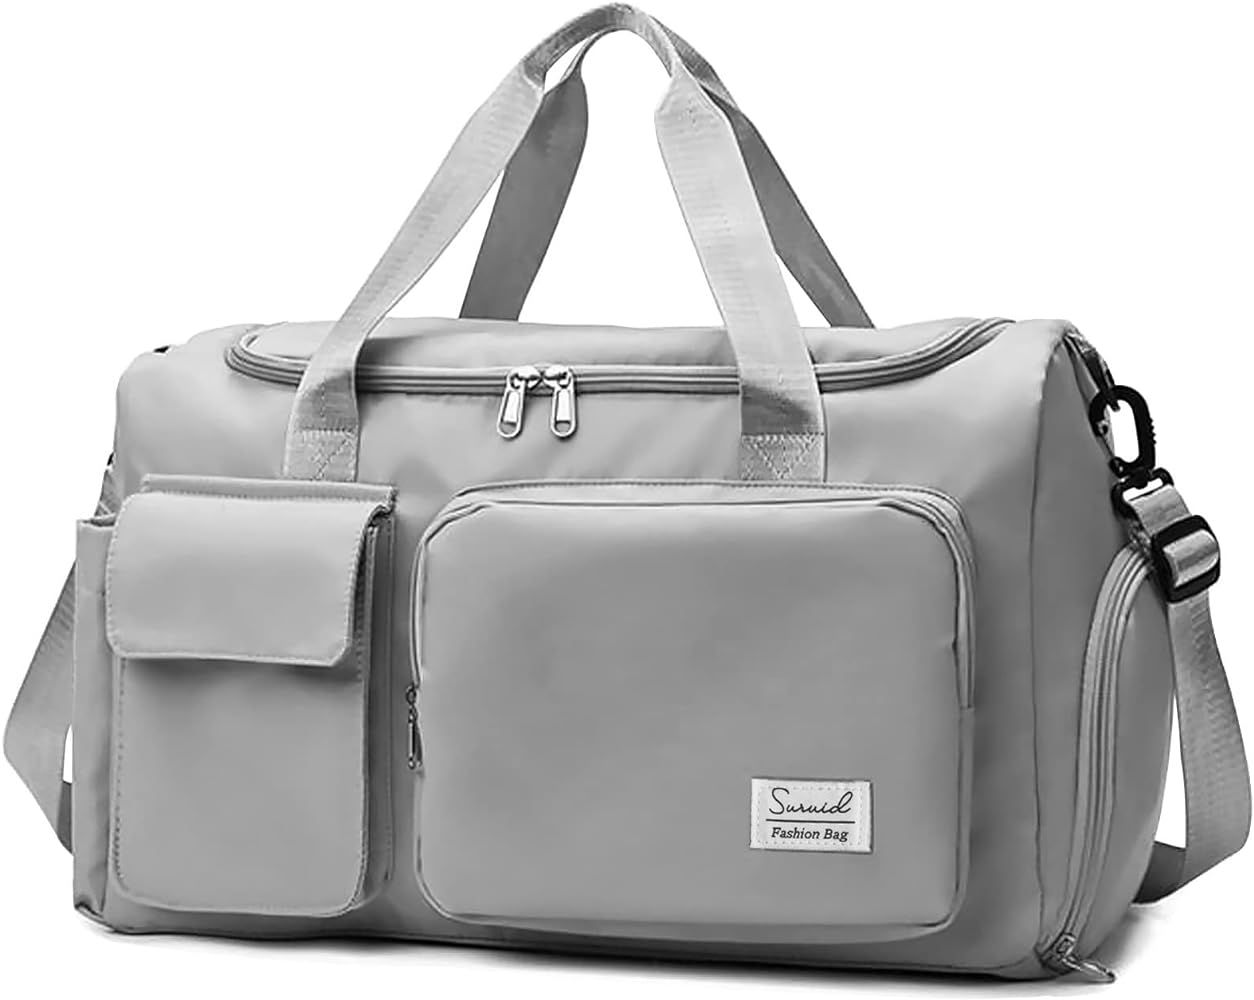 Suruid Sports Gym Bag with Shoes Compartment Travel Duffel Bag with Dry Wet Separated Pocket for Men and Women, Overnight Bag Weekender Bag Training Handbag Yoga Bag - Gray | Amazon (US)